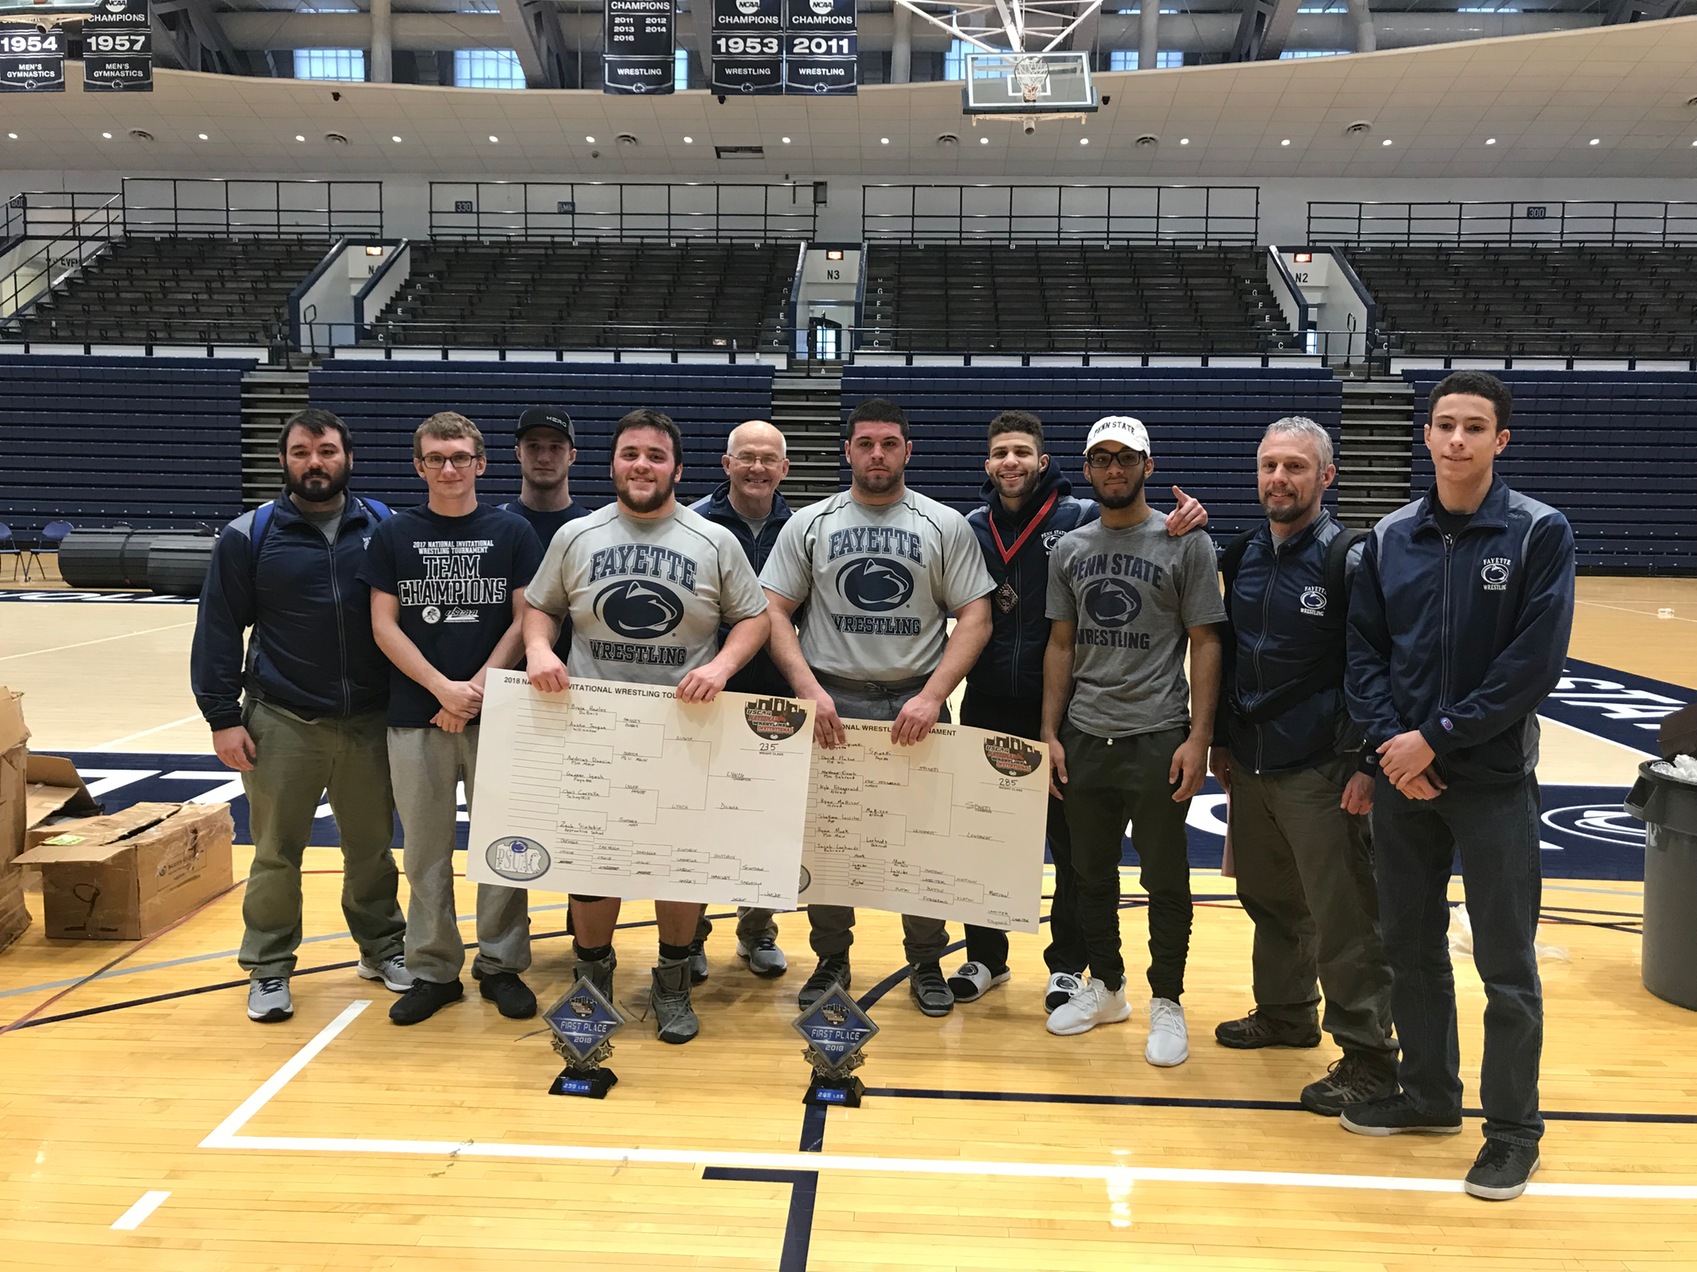 Spinetti and Lynch take 1st in PSUAC/USCAA Invitational